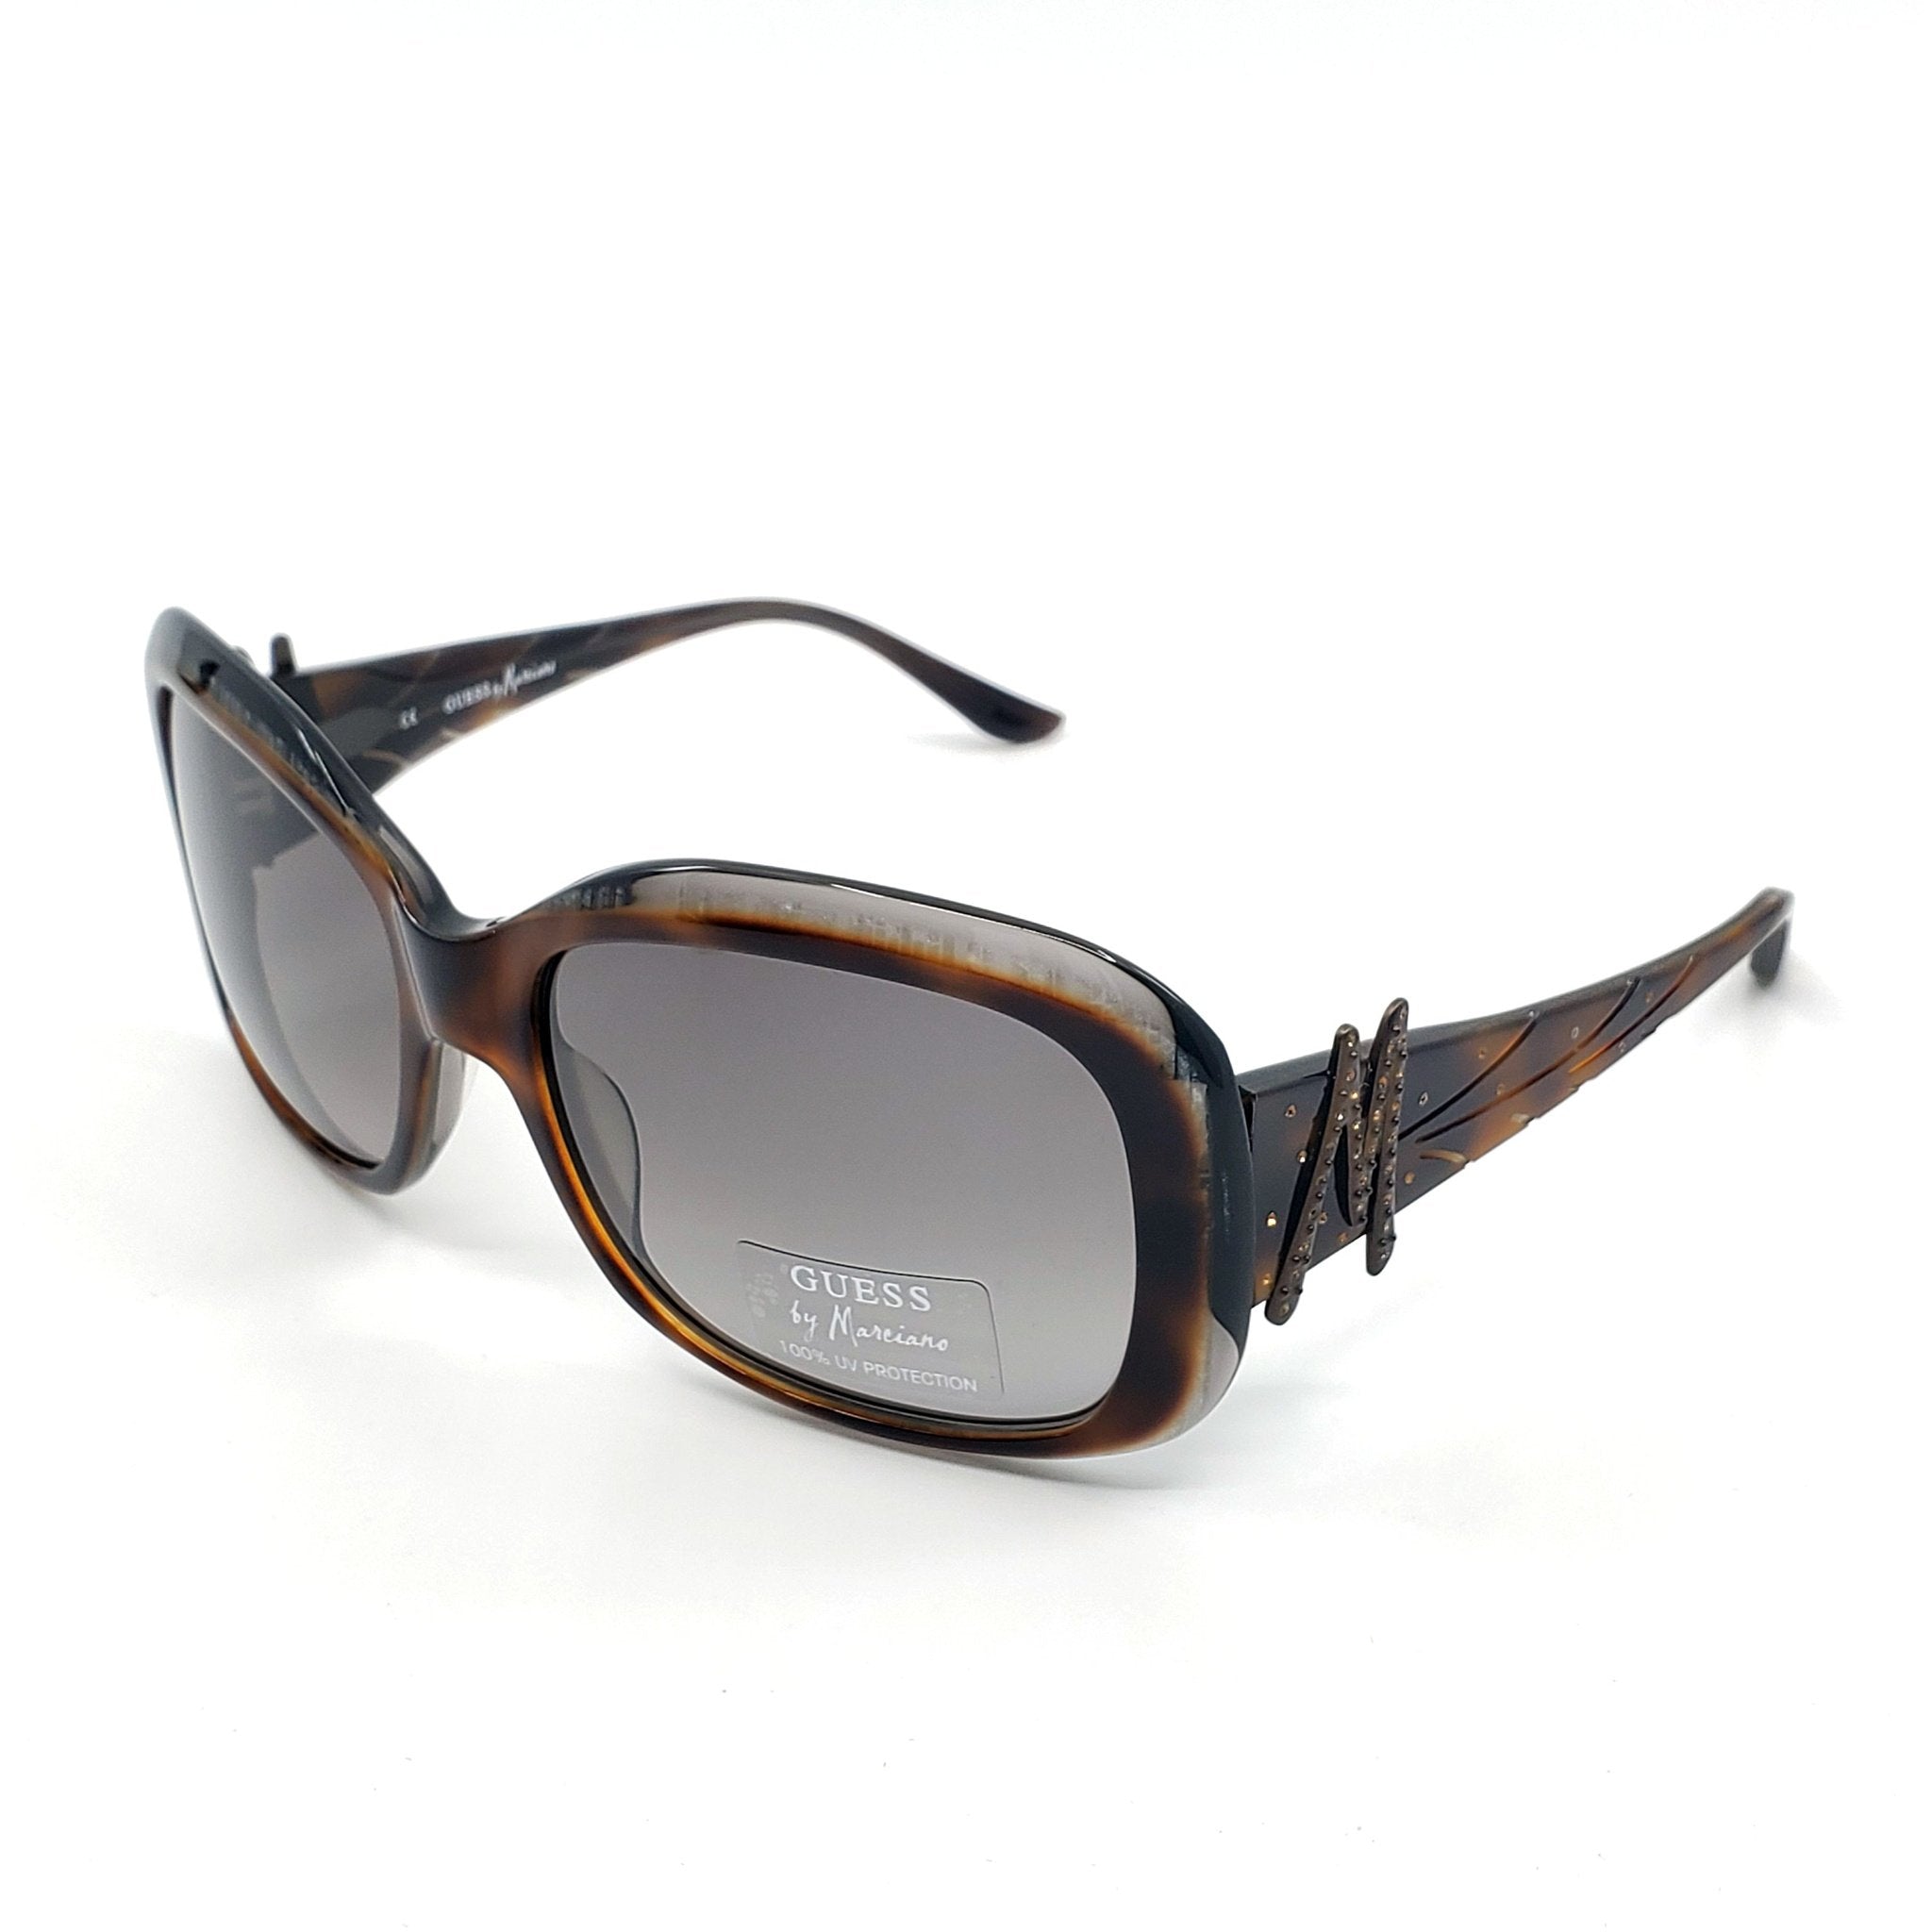 Guess by Marciano Sunglasses - GM606